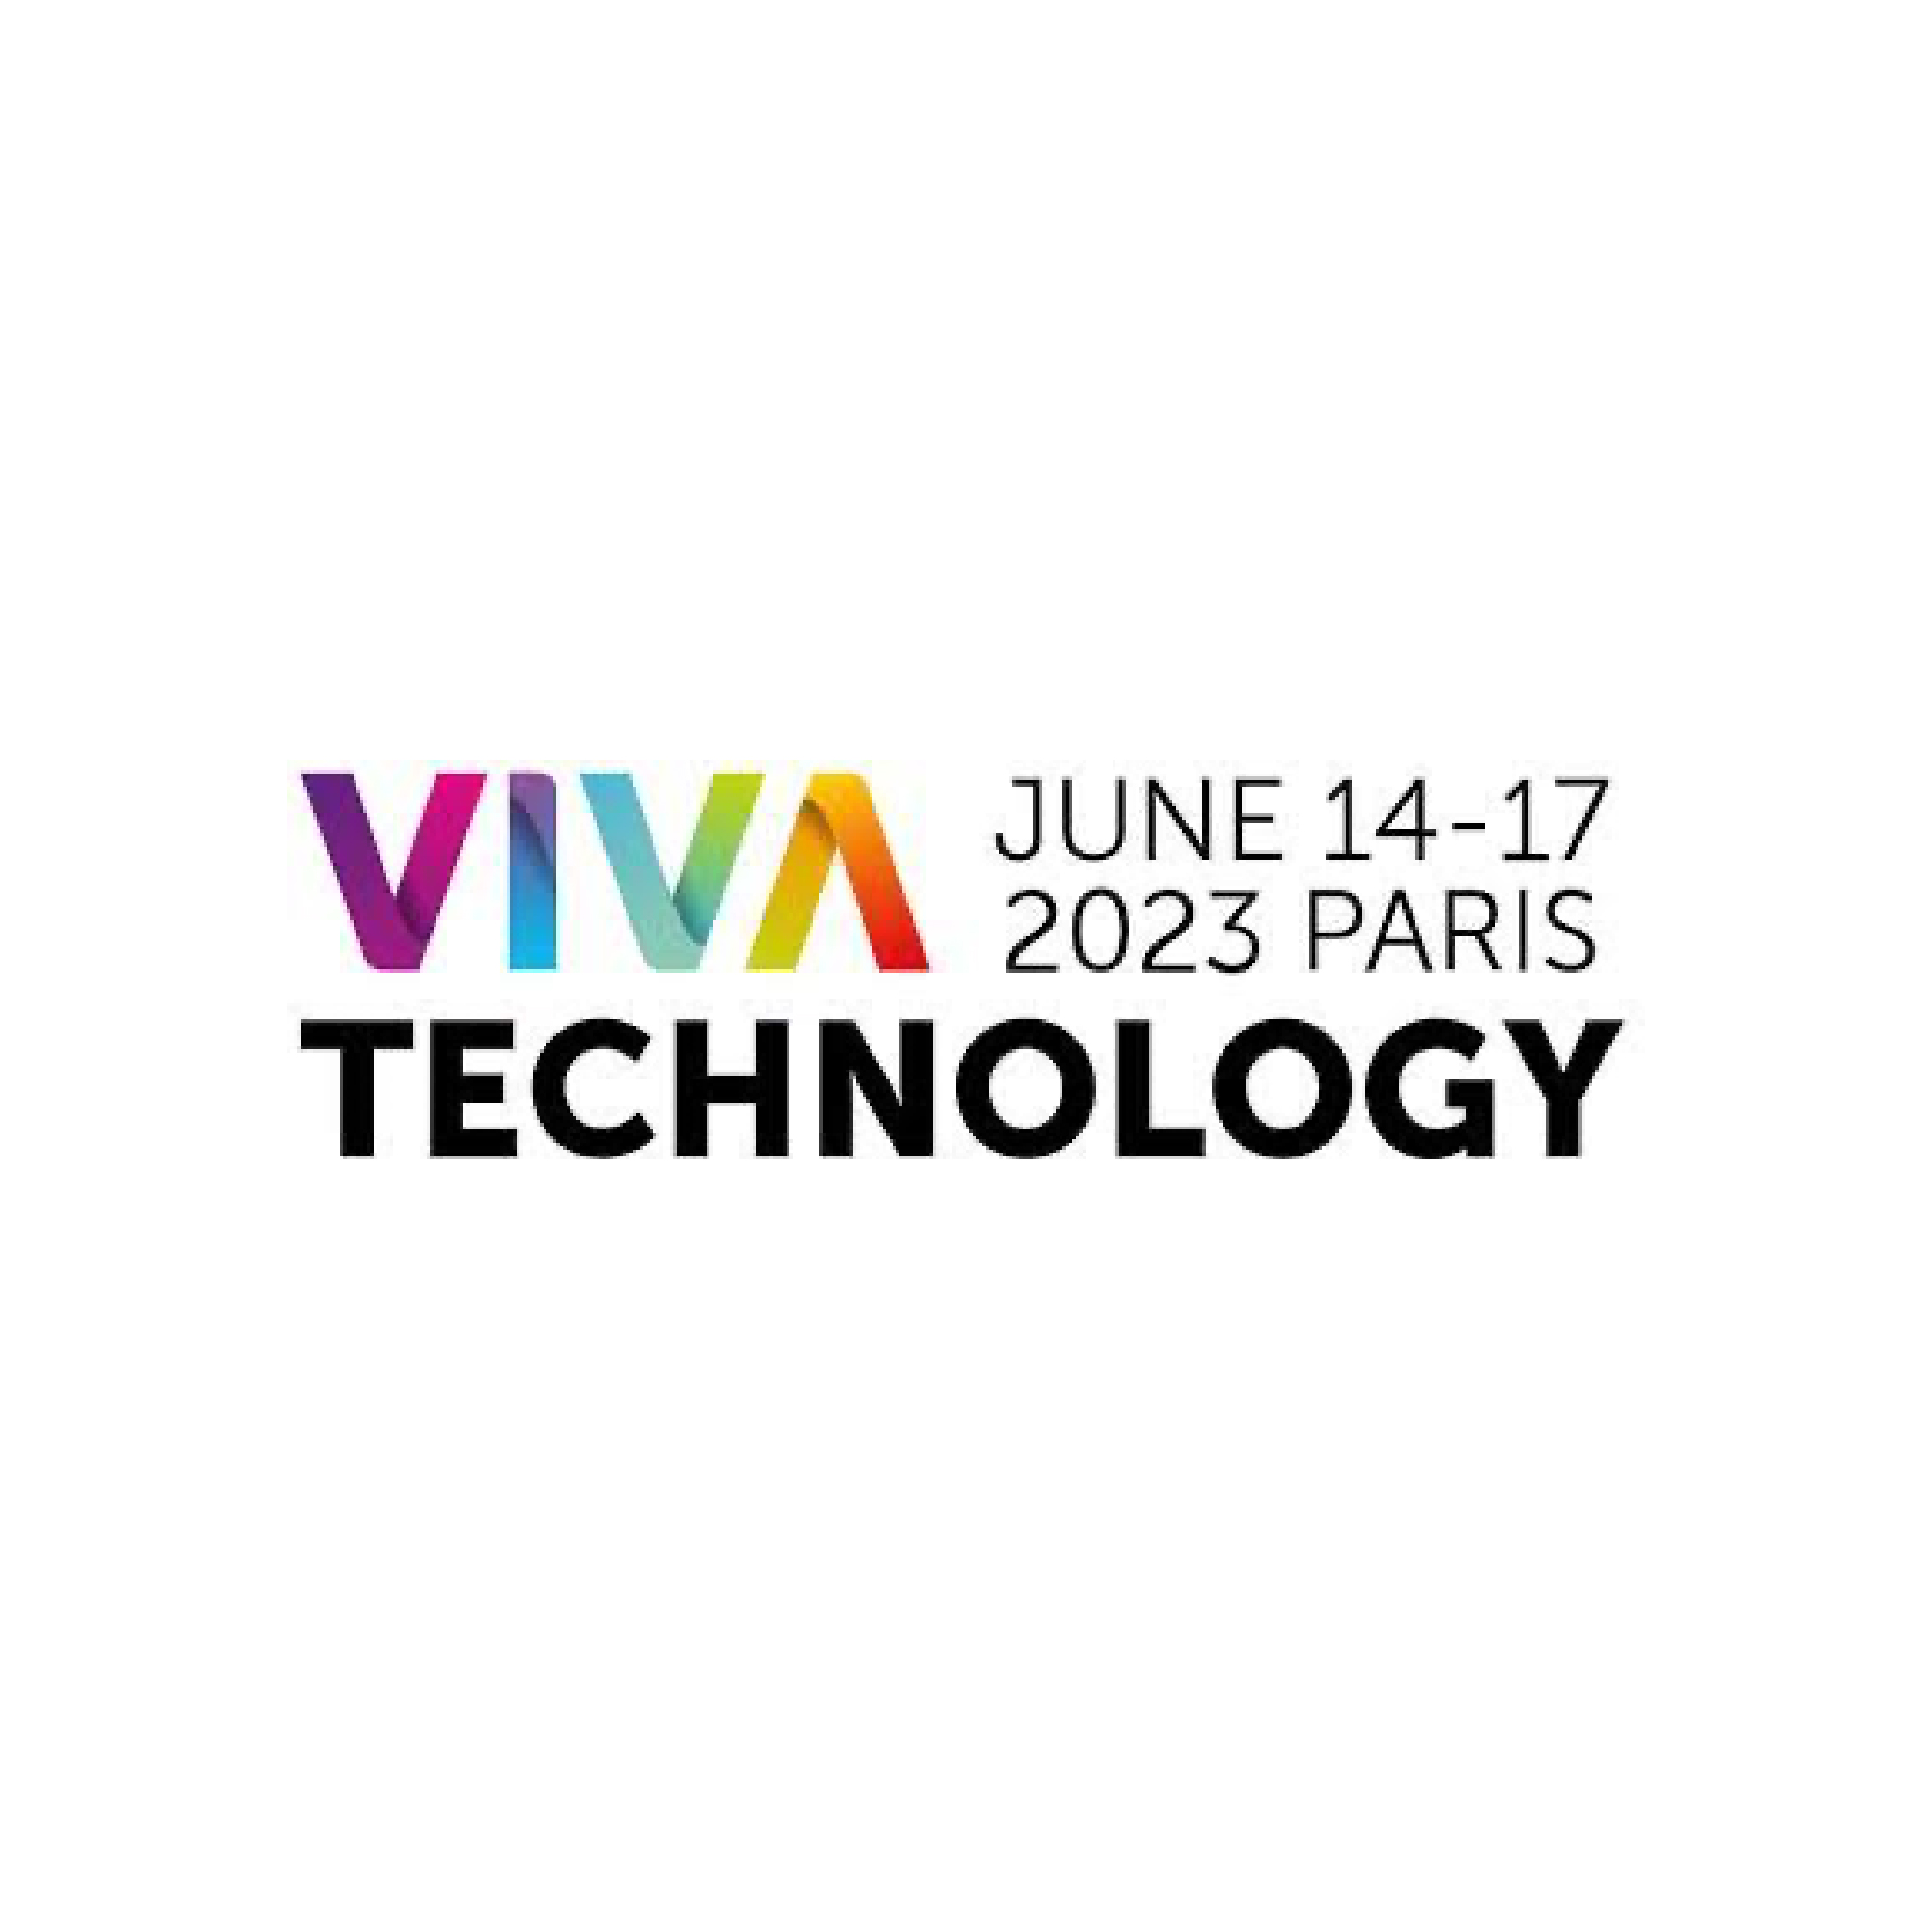 Meet us at VIVA TECHNOLOGY on 14-17th of June in Paris.